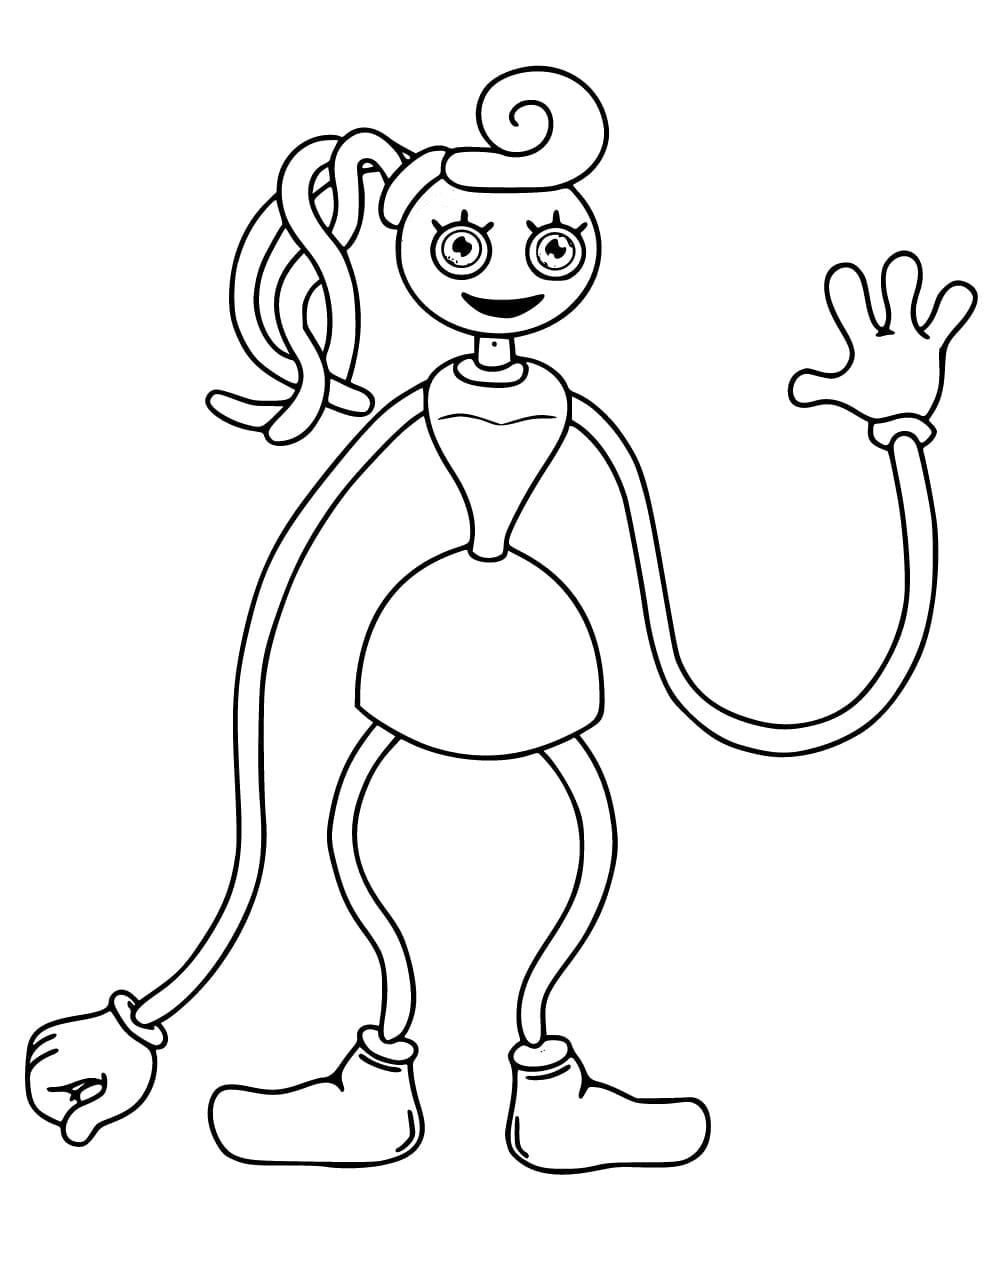 Mommy Long Legs Coloring by benzo bunny, Mommy Long Legs